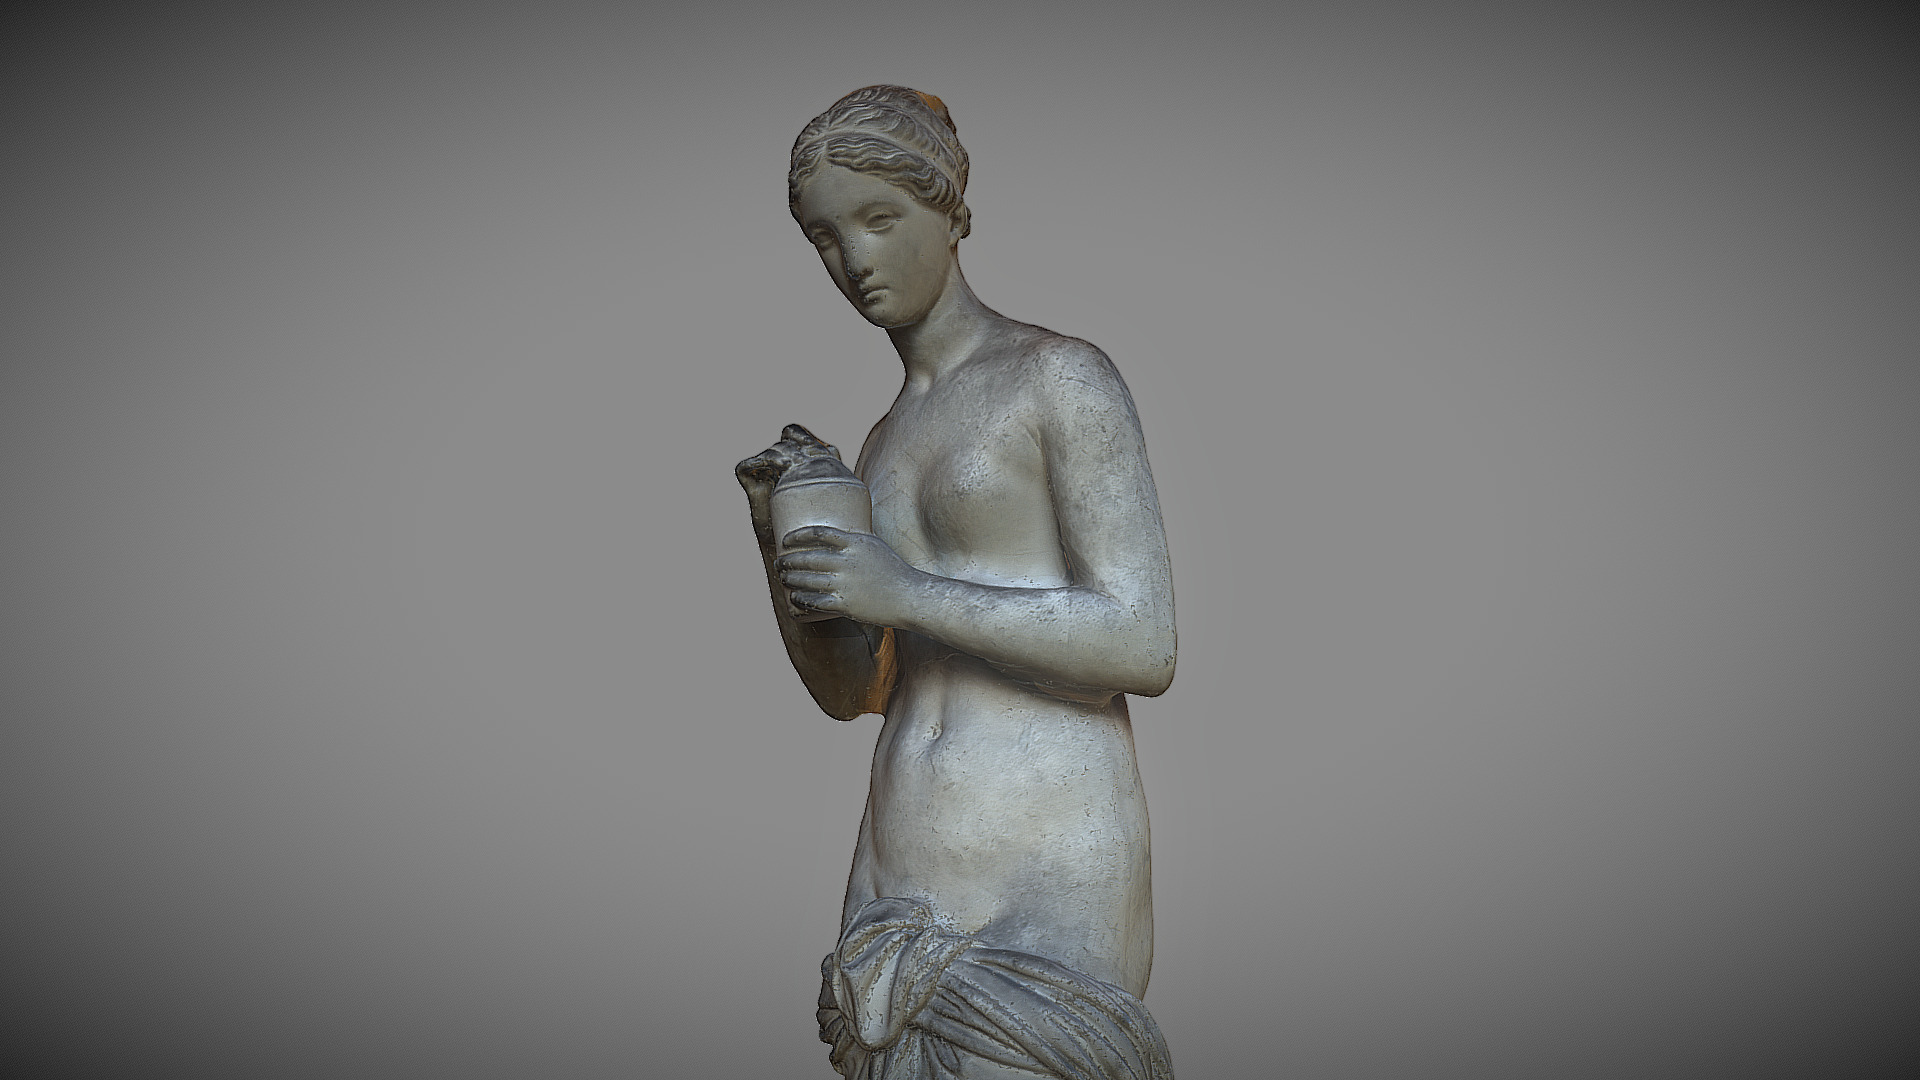 Psyche with the jar (1806), (ref A26), Bertel Thorvaldsens, plaster, height: 1,32 m. Thorvaldsens museum (Copenhagen, Denmark). Made with Memento Beta (now ReMake) from AutoDesk.

On this plaster, the wings are still not present but will be added on the final sculpture in marble.

For more updates, please follow @GeoffreyMarchal on Twitter 3d model